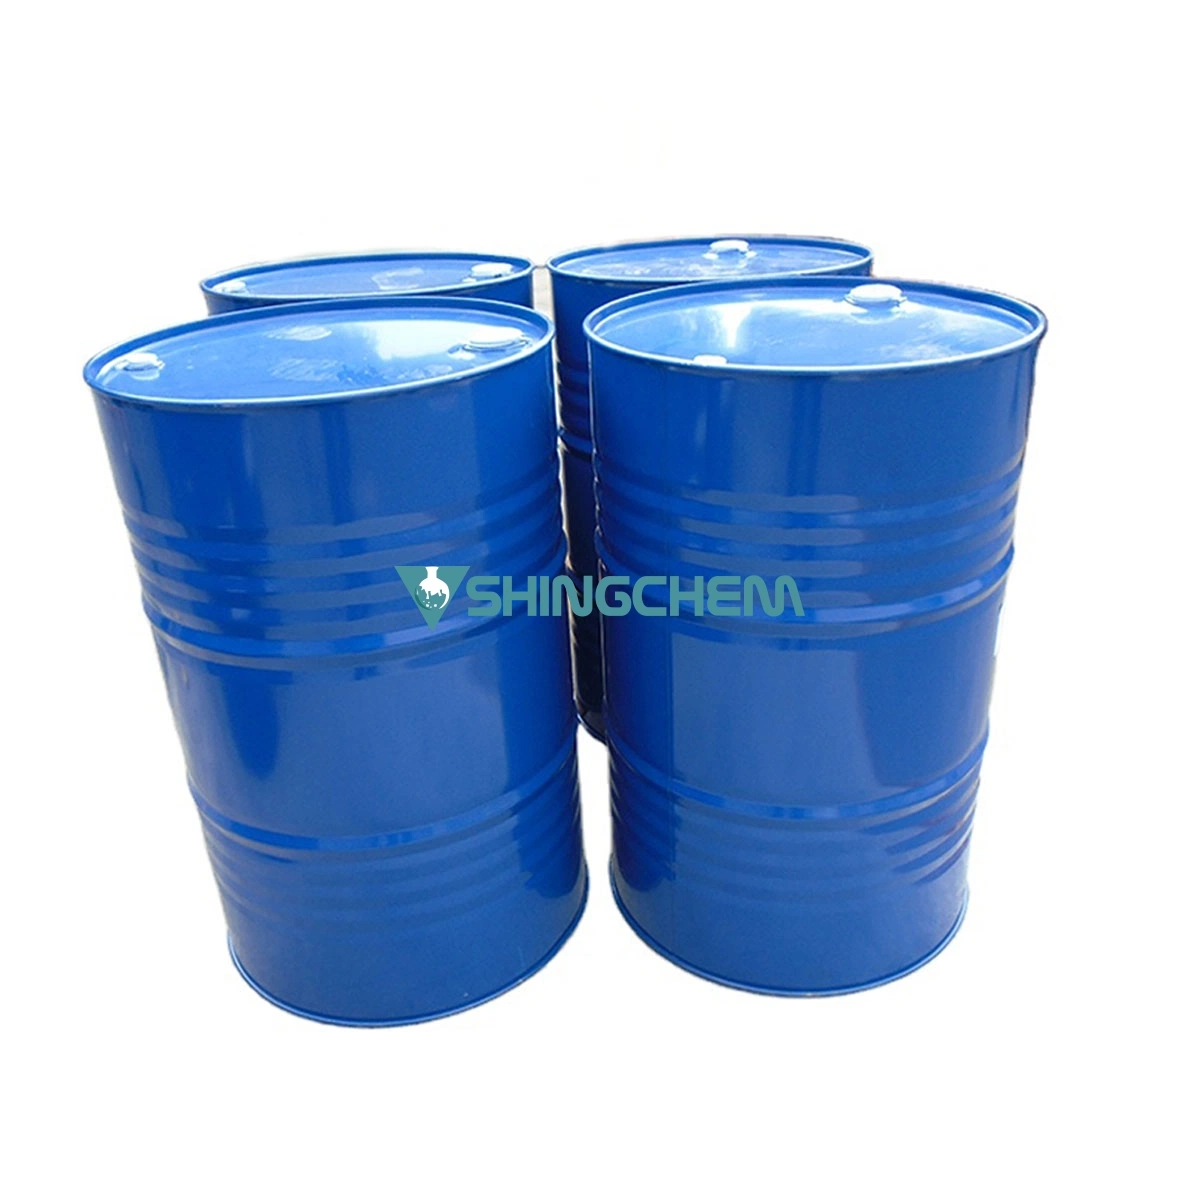 High Performance China Factory Direct CAS 79-01-6 Chemicals Tce Trichloroethylene